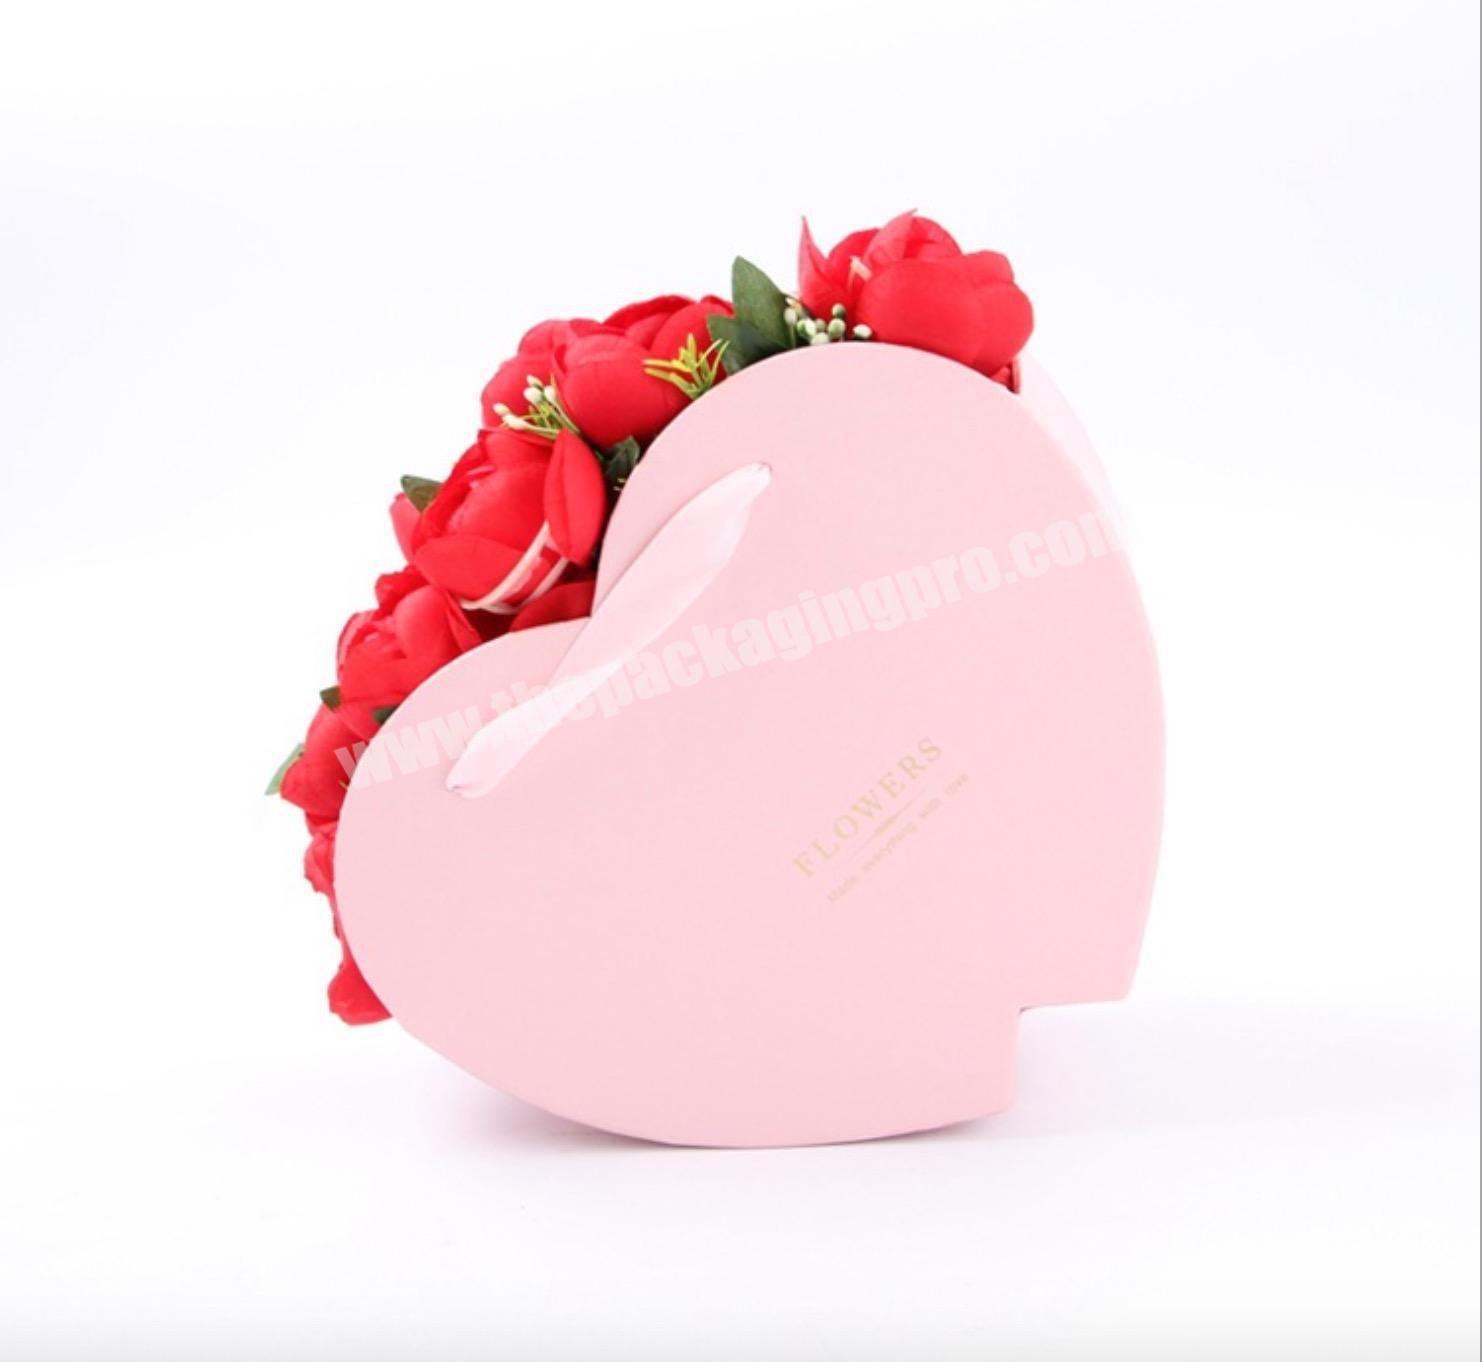 Paper Gift Rose Bouquet Packaging Red High End Heart-shaped Cake Deluxe Black Roses Boxes Heart Shaped Flower Box Cardboard